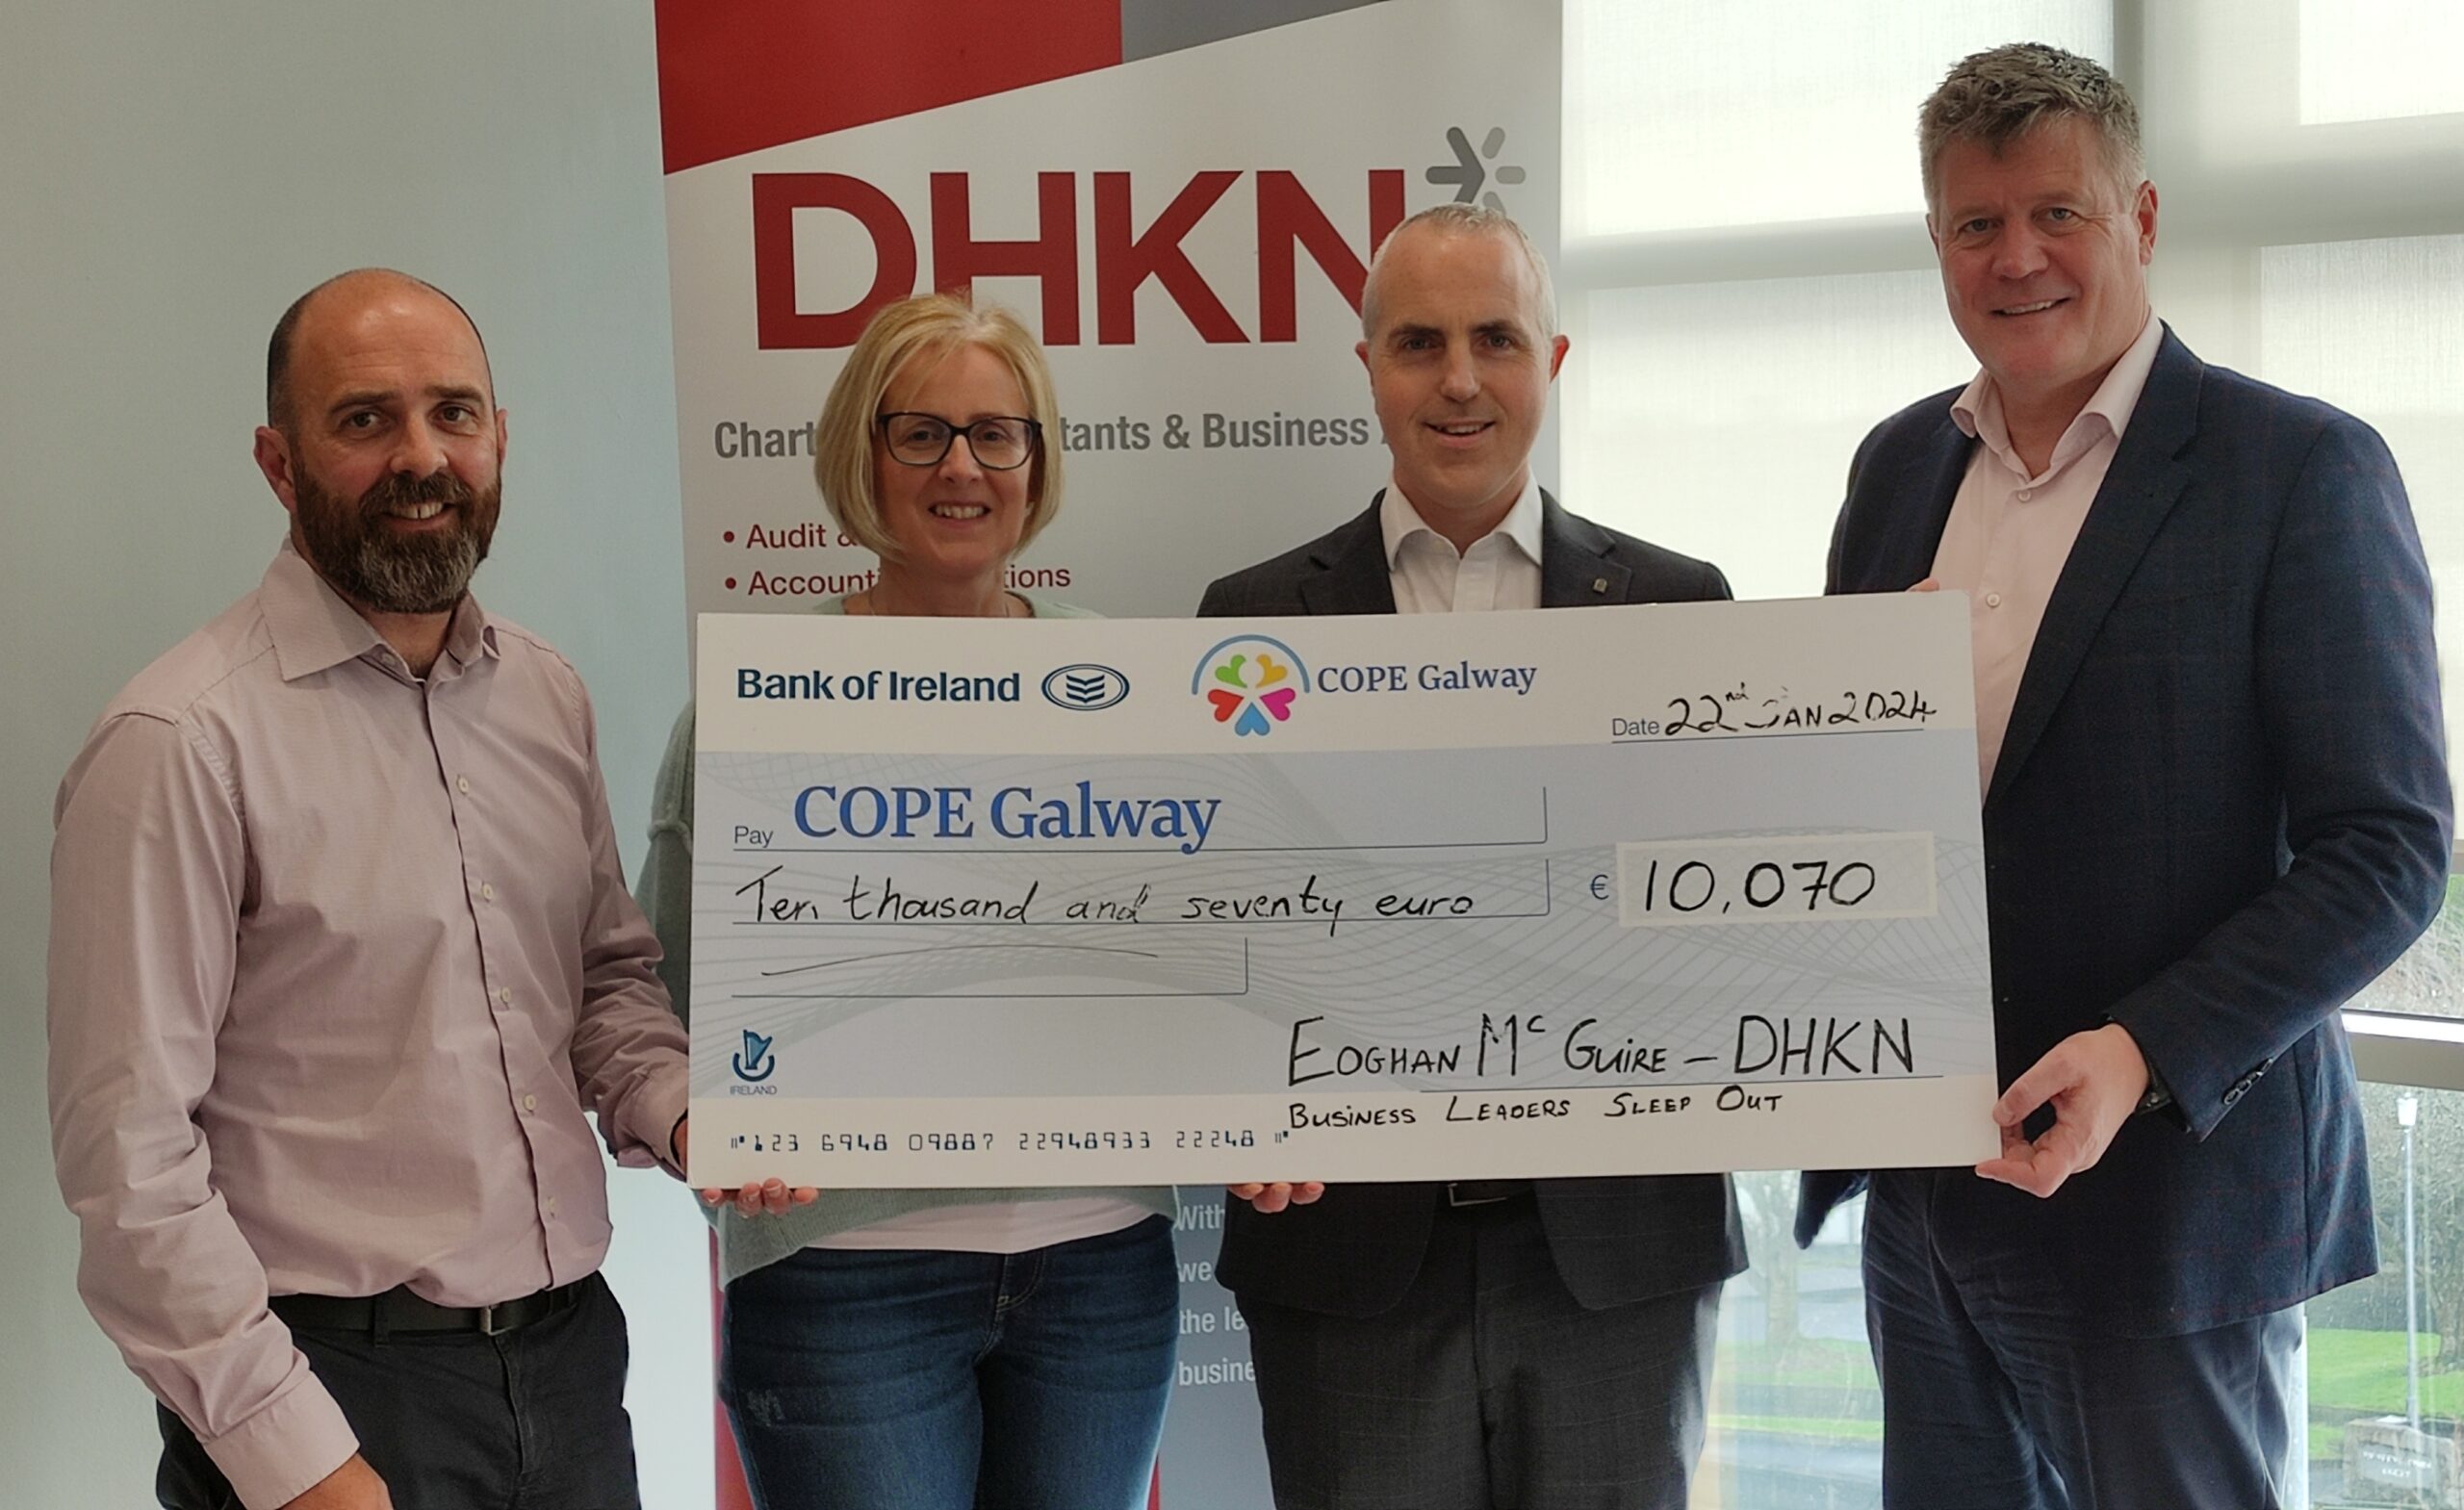 Eoghan McGuire of DHKN took part in the Cope Galway Business Leaders Sleep Out to raise funds for Cope's homelessness activities. Eoghan has so far raised over €10,000 for Cope. Pictured are: (L to R) Stephen Crowley, Partner at DHKN; Sharon Fitzpatrick, Head of Development at Cope Galway; Eoghan McGuire, Associate Director at DHKN; and Mark Gibbs, Partner at DHKN